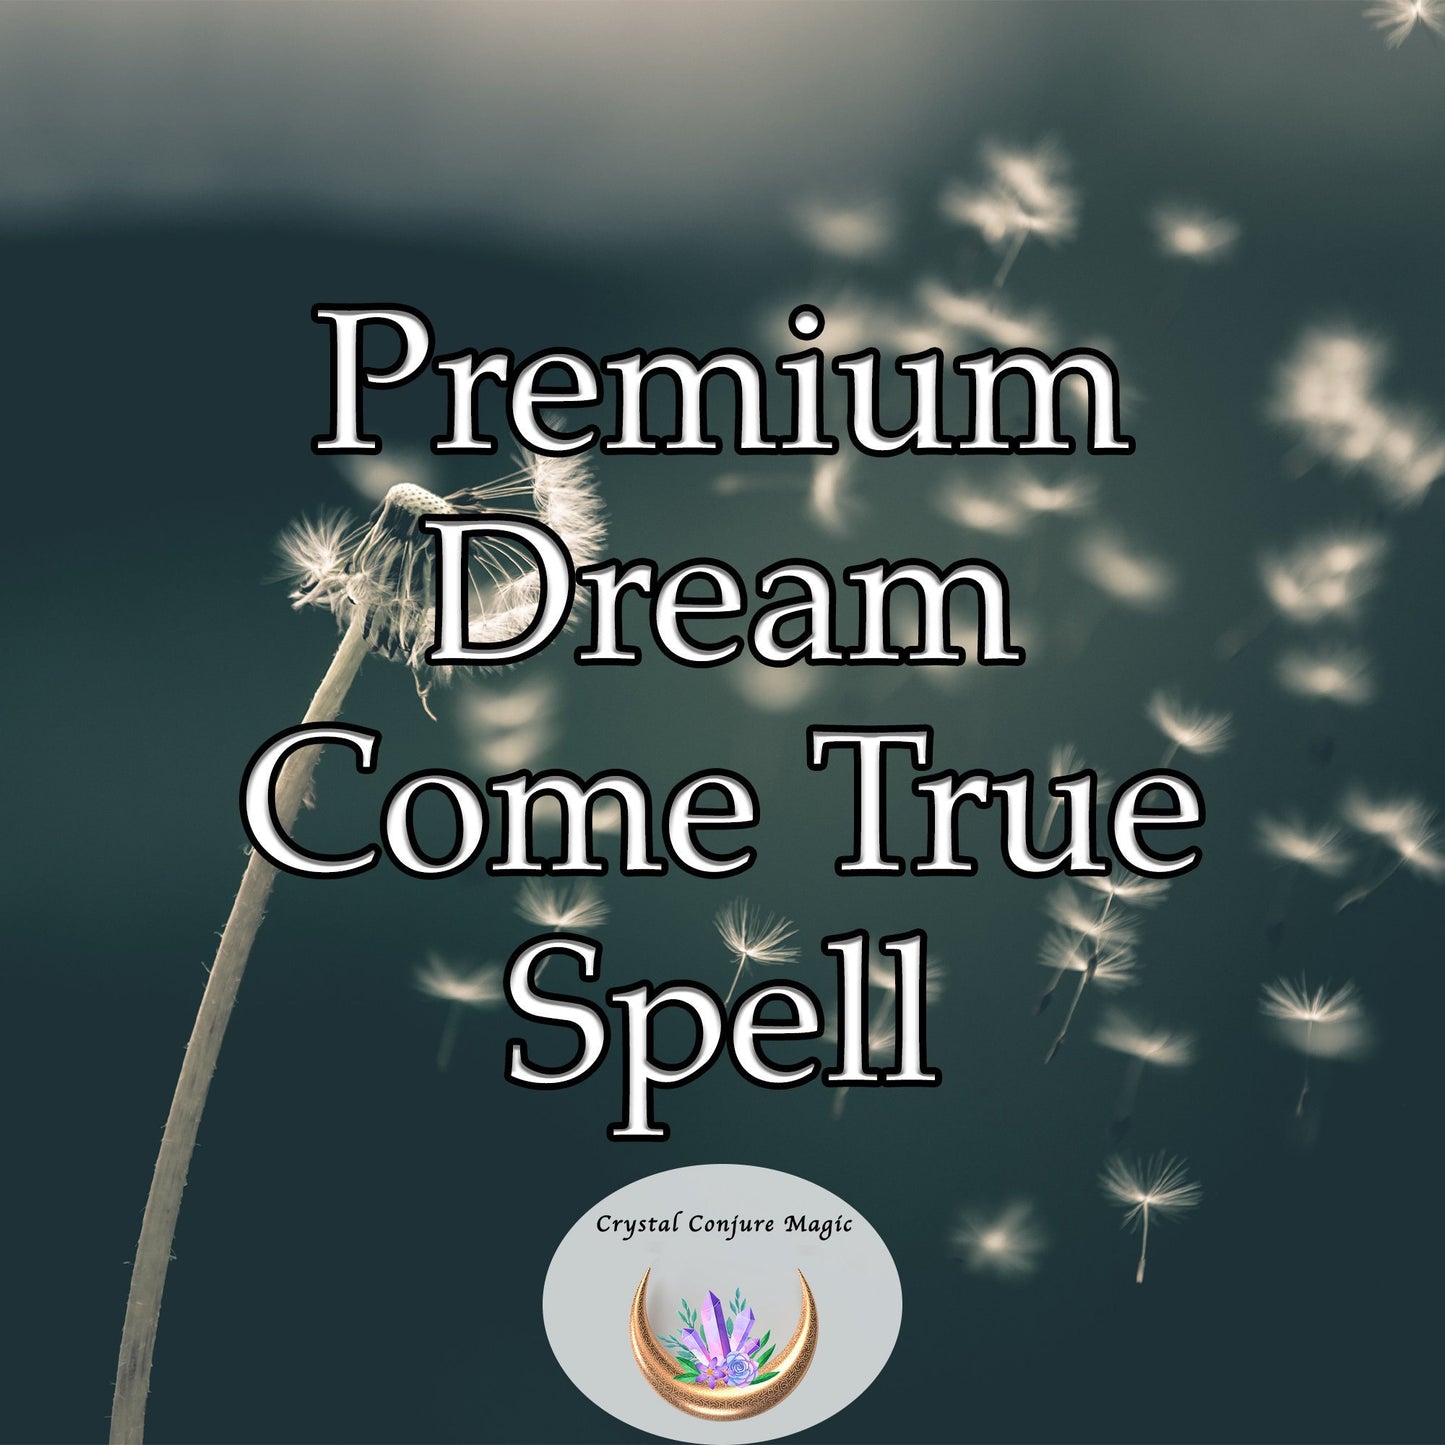 Premium Dream Come True Spell - transform the ethereal fragments of your dreams into tangible components of your reality